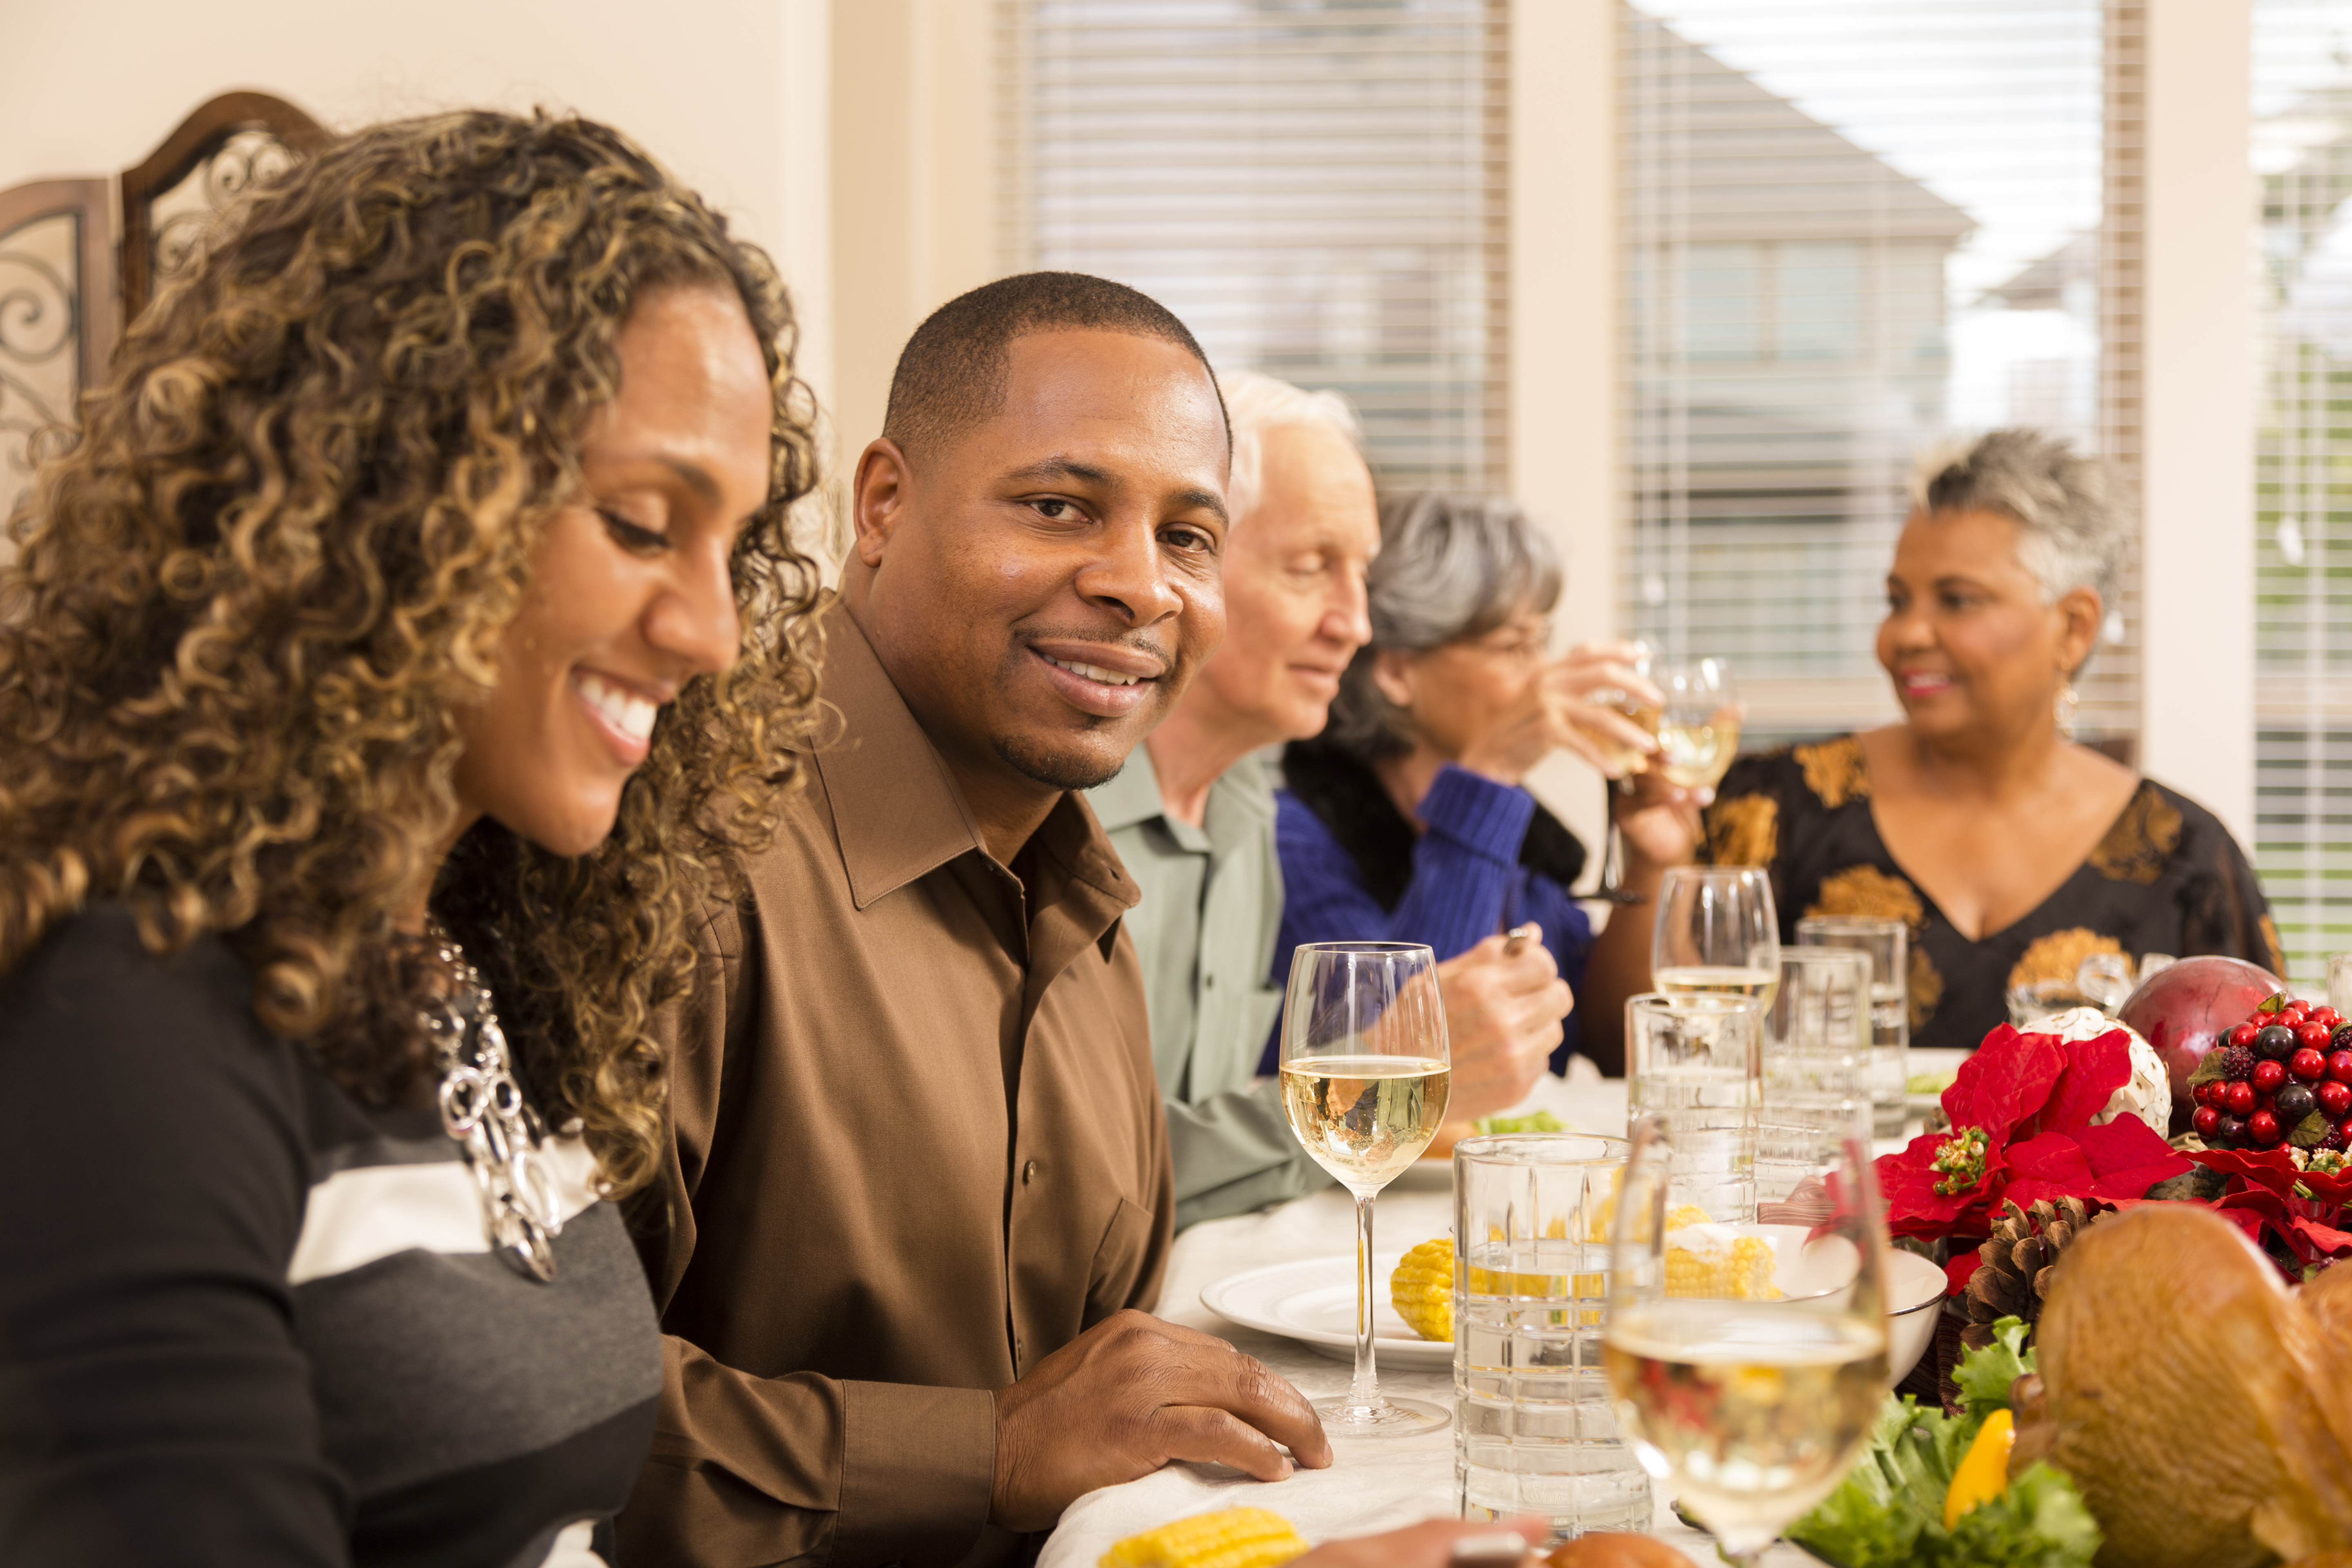 Relationships: Family and friends gather for Christmas dinner party.